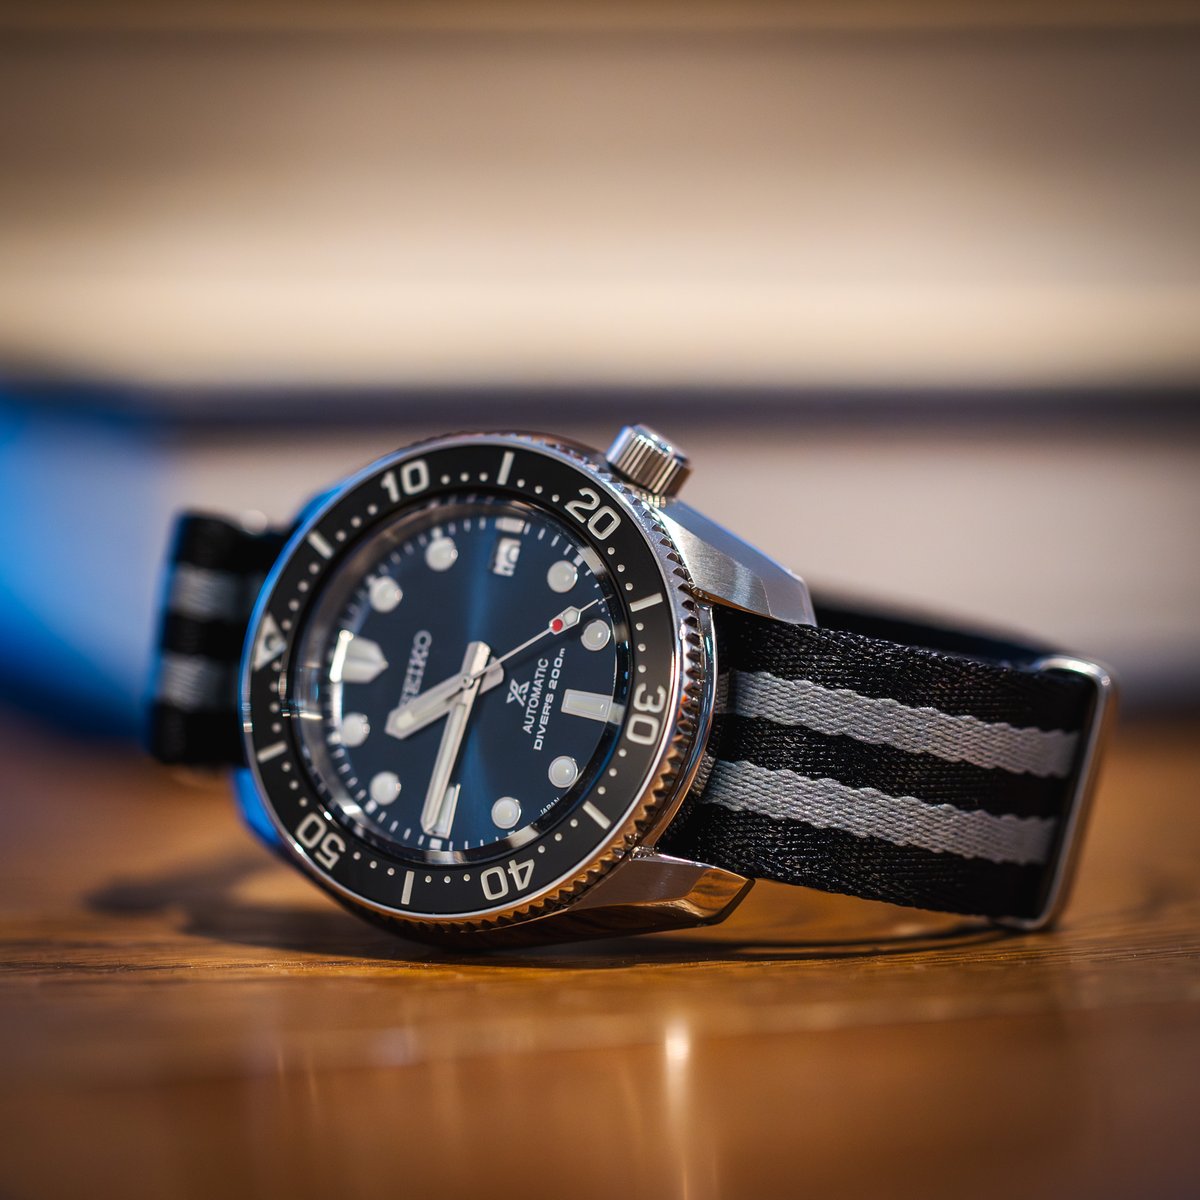 Do you think we'll see James Bond wearing a Seiko again? Roger Moore was certainly a fan, and even though they were mostly digital watches, it would be great to see Bond wearing a Seiko diver. #pws #planetwatchstraps #spb187 #seiko #divewatch #horology #wornandwound #jamesbond